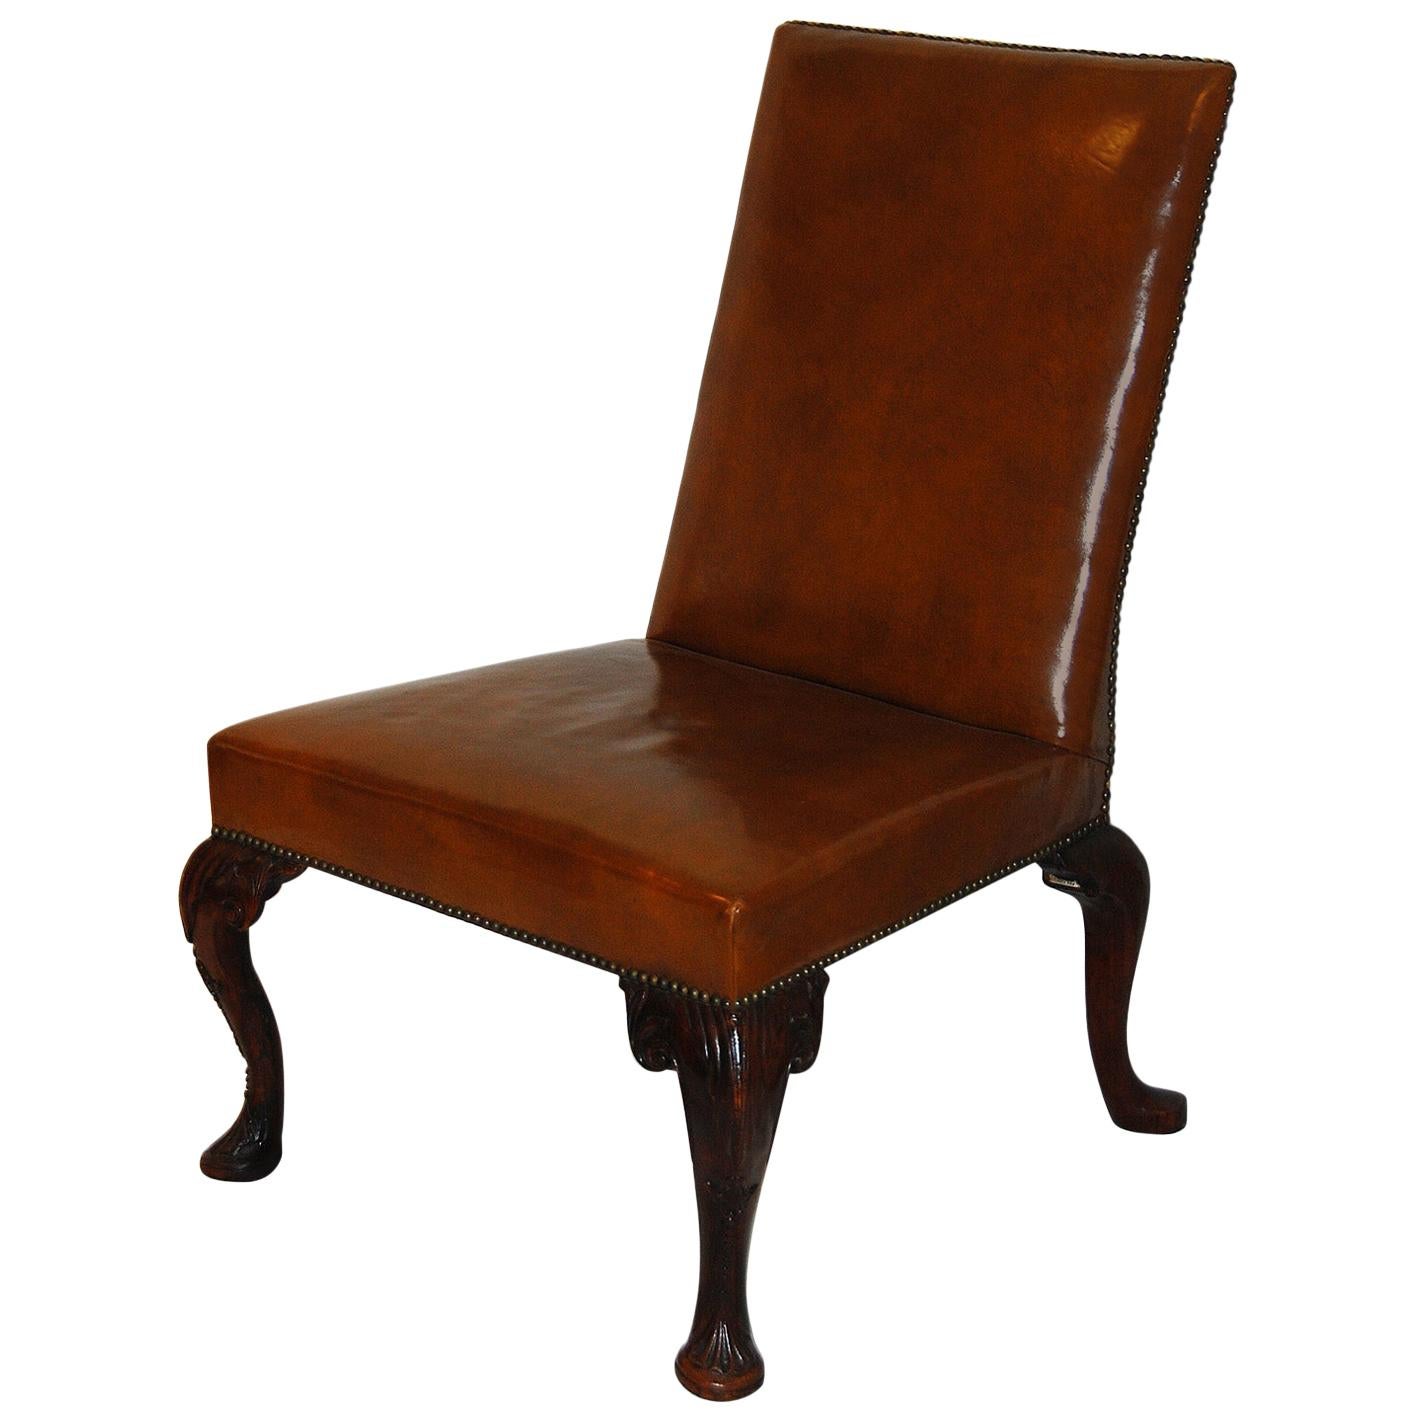 Why is it called a Queen Anne chair?